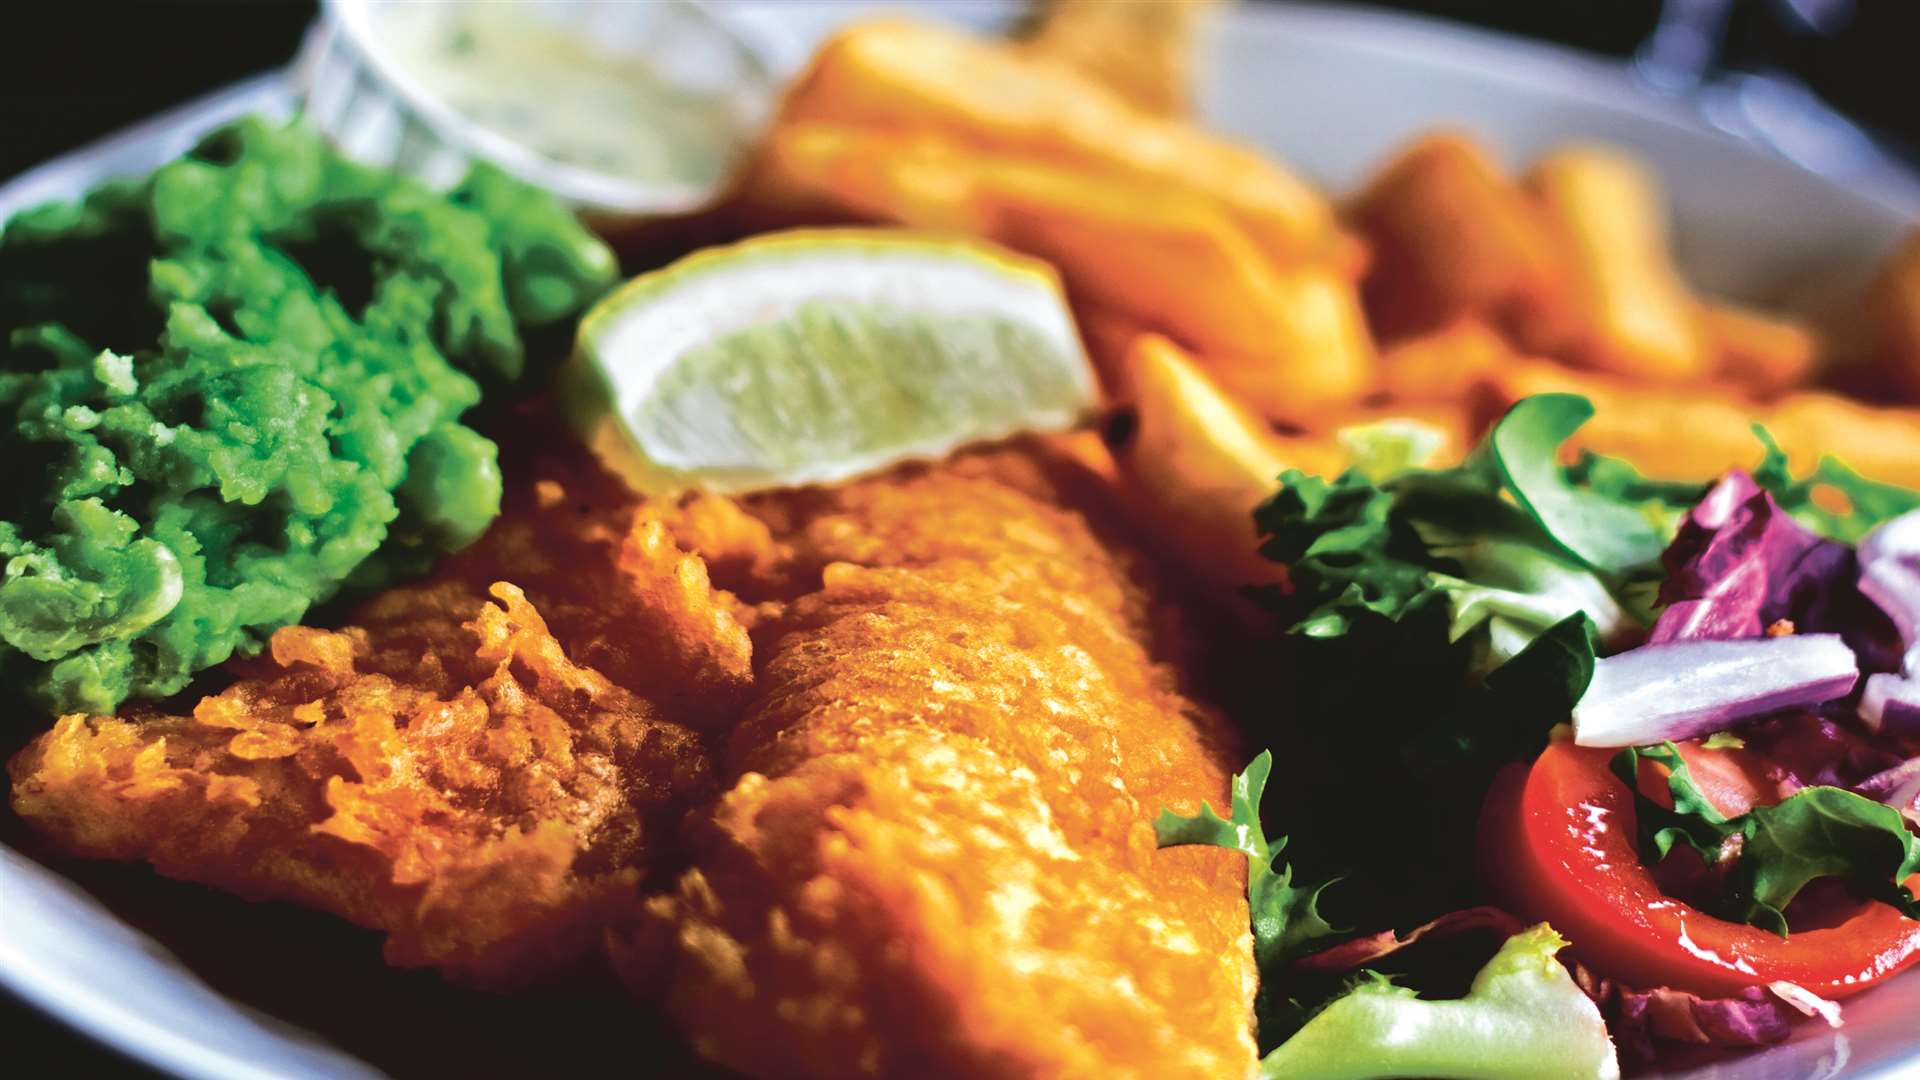 Yum! Fish and chips - not as bad for you as you might think